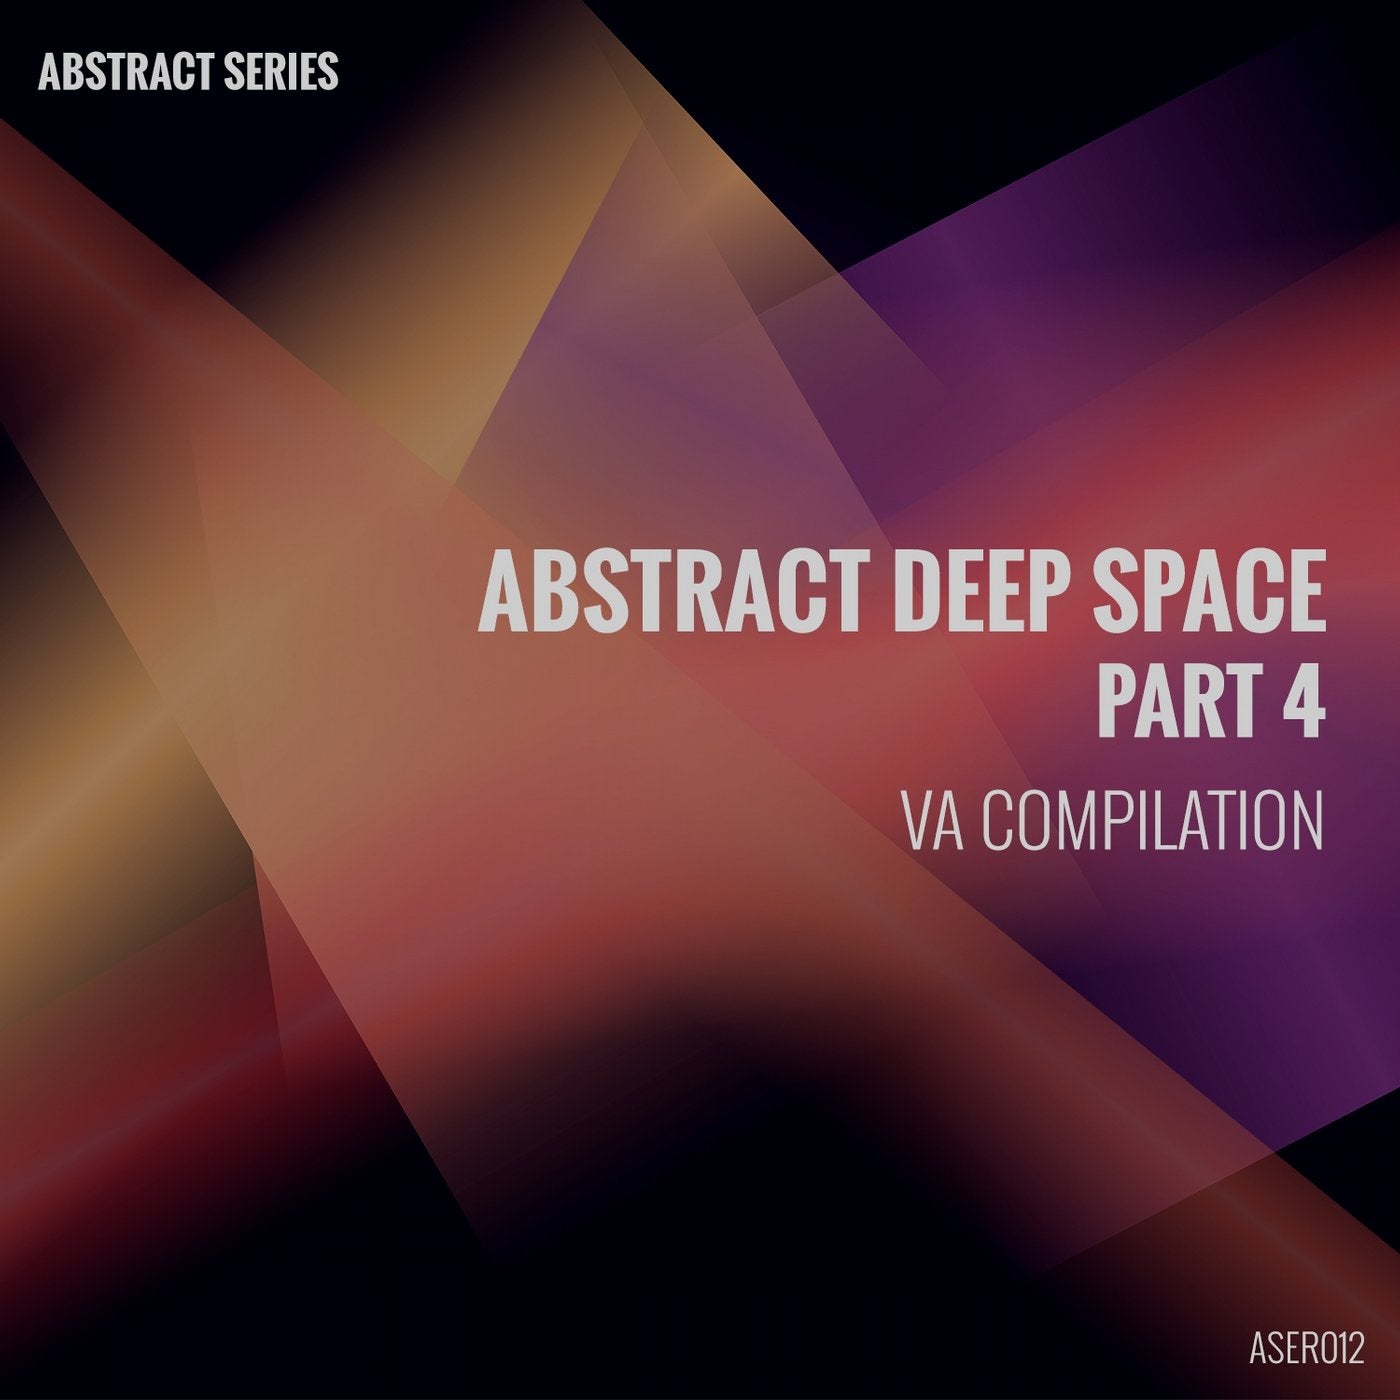 Abstract Deep Space Part 4 VA Compilation